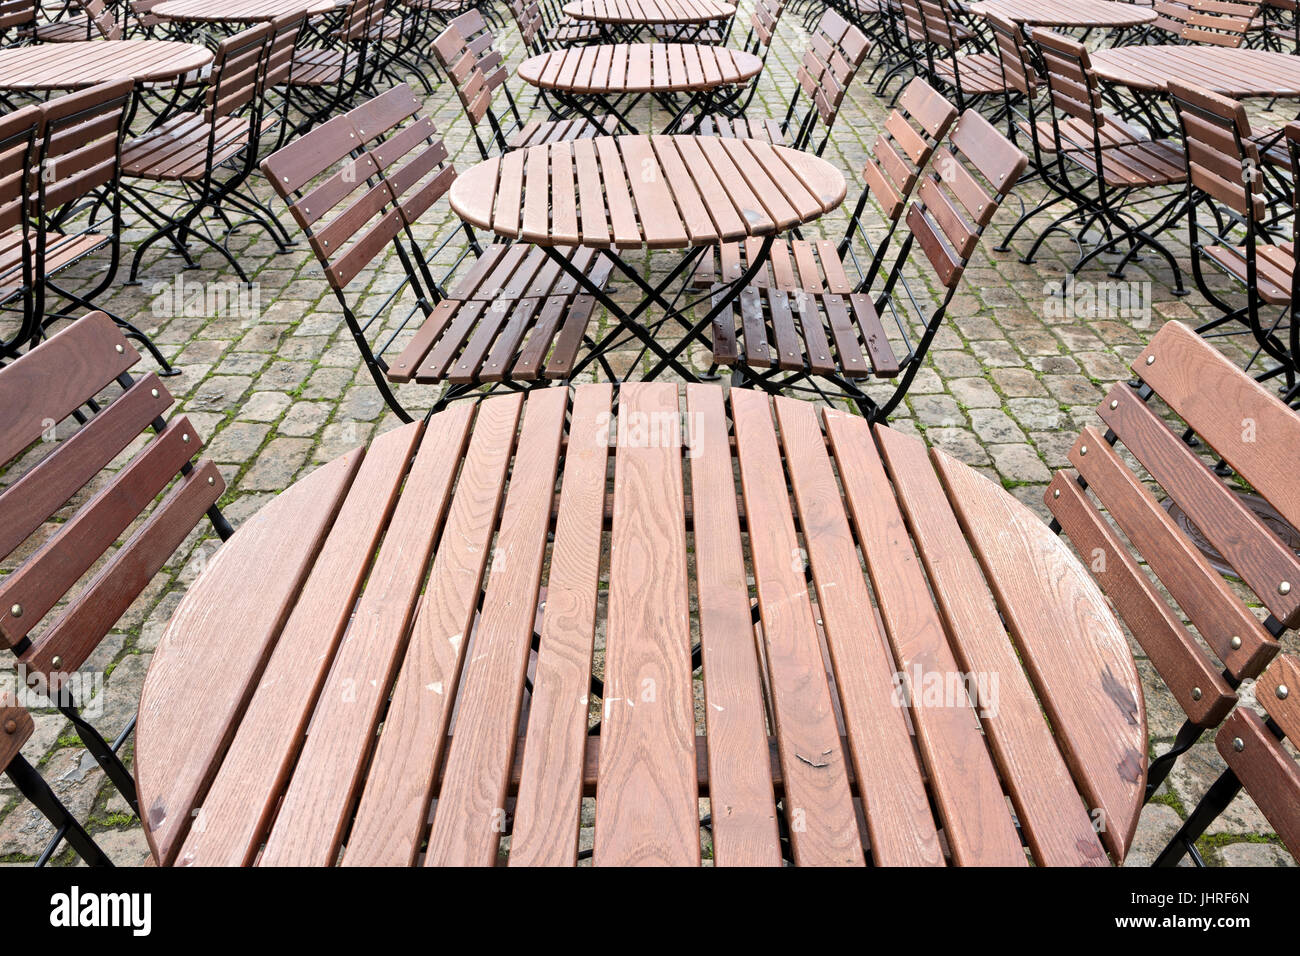 tables and chairs of a beer garden Stock Photo